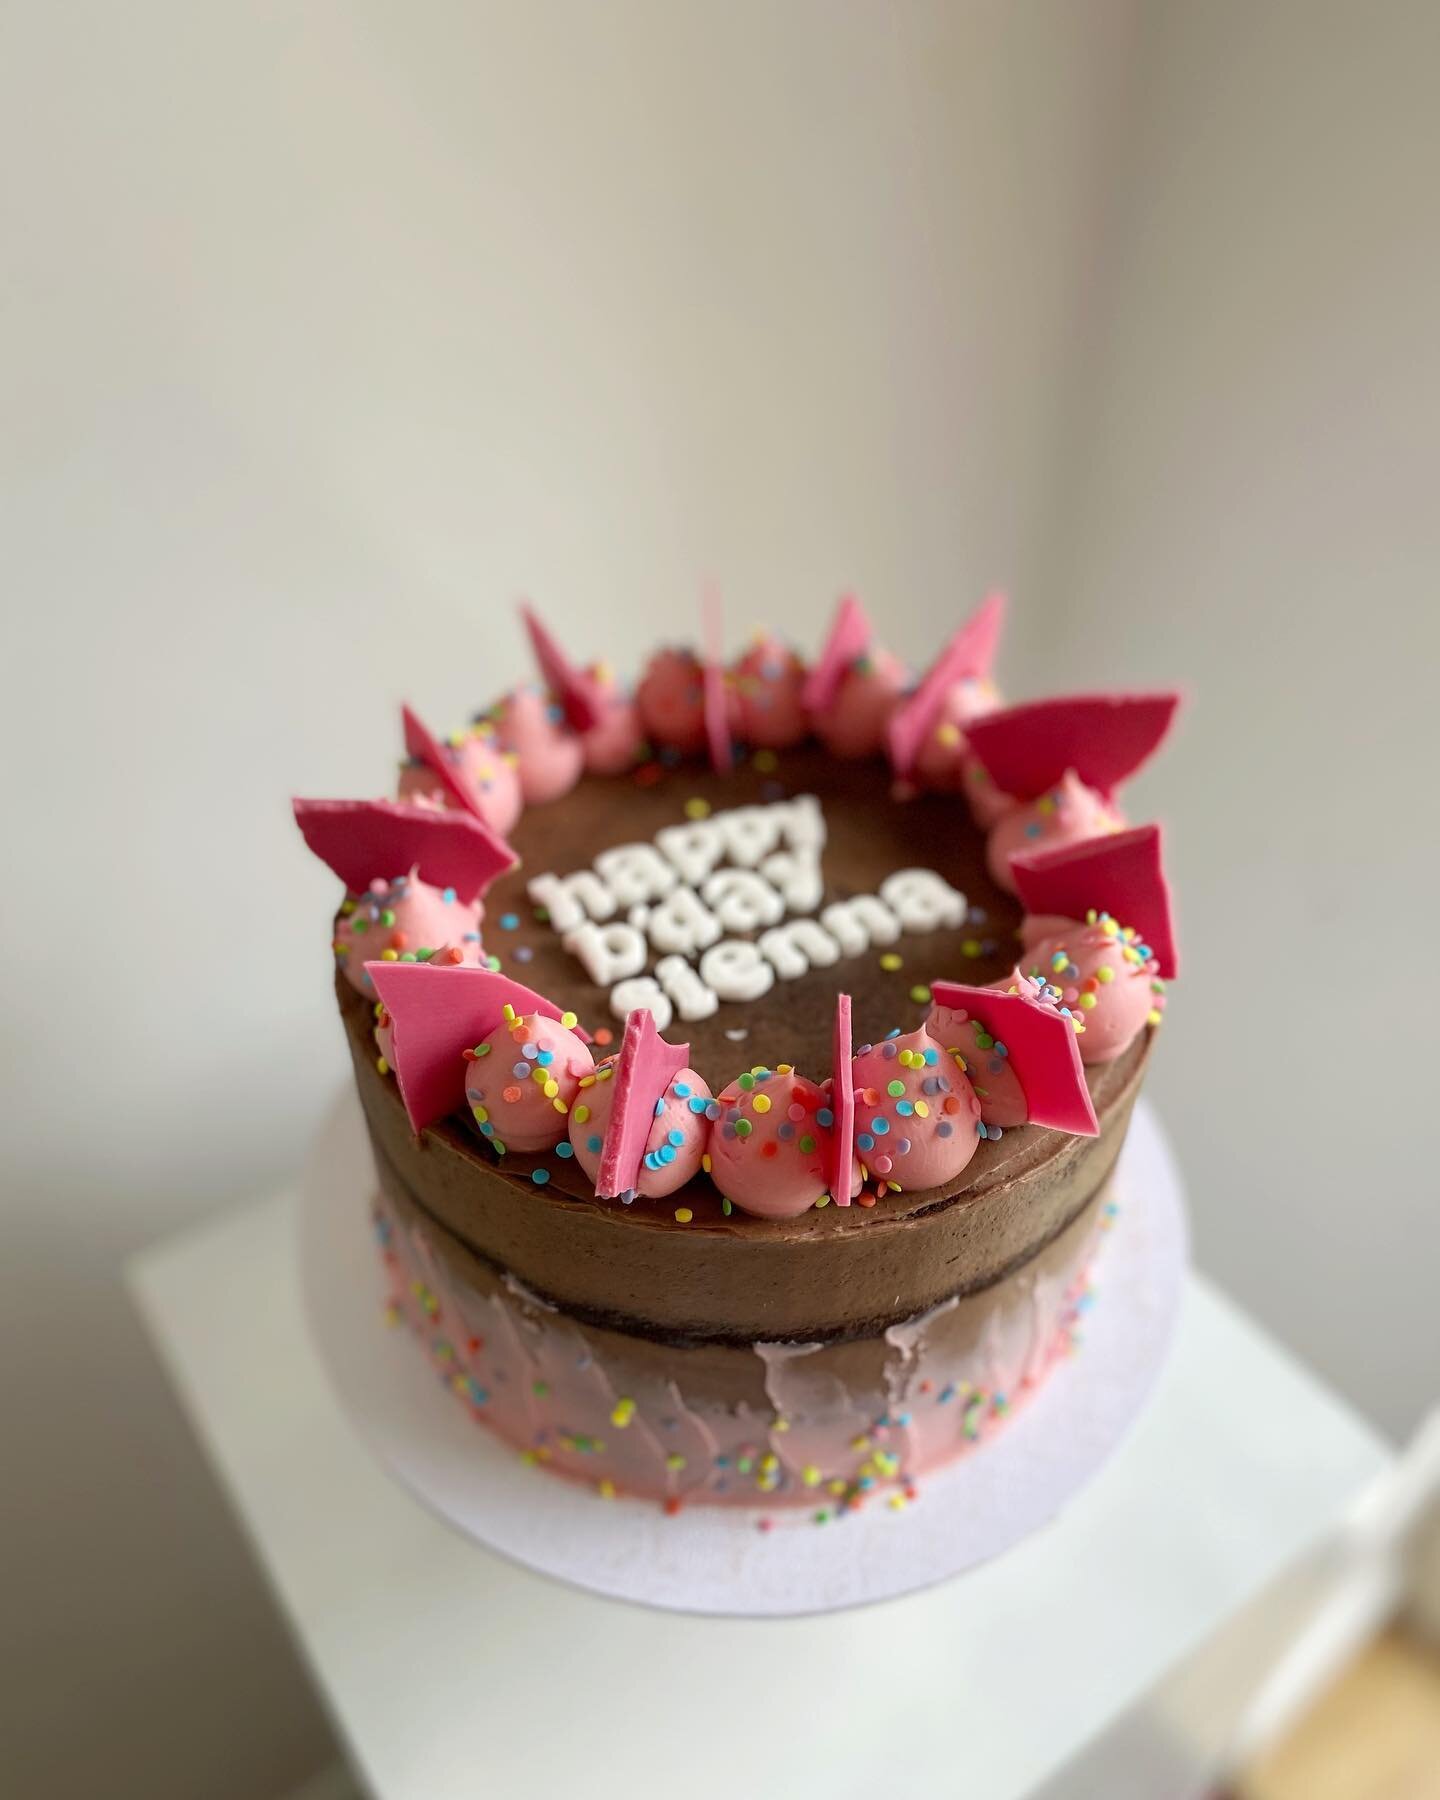 Saturdays are for parties and chocolate cake 🤤 This celebration cake will be available to order through the website soon. Just choose your size, colour and message. Easy peasy.
.
.
.
.
.
.
.
.
.
.
#nottinghamcakes #birthdaycake #nottinghambaker #cak